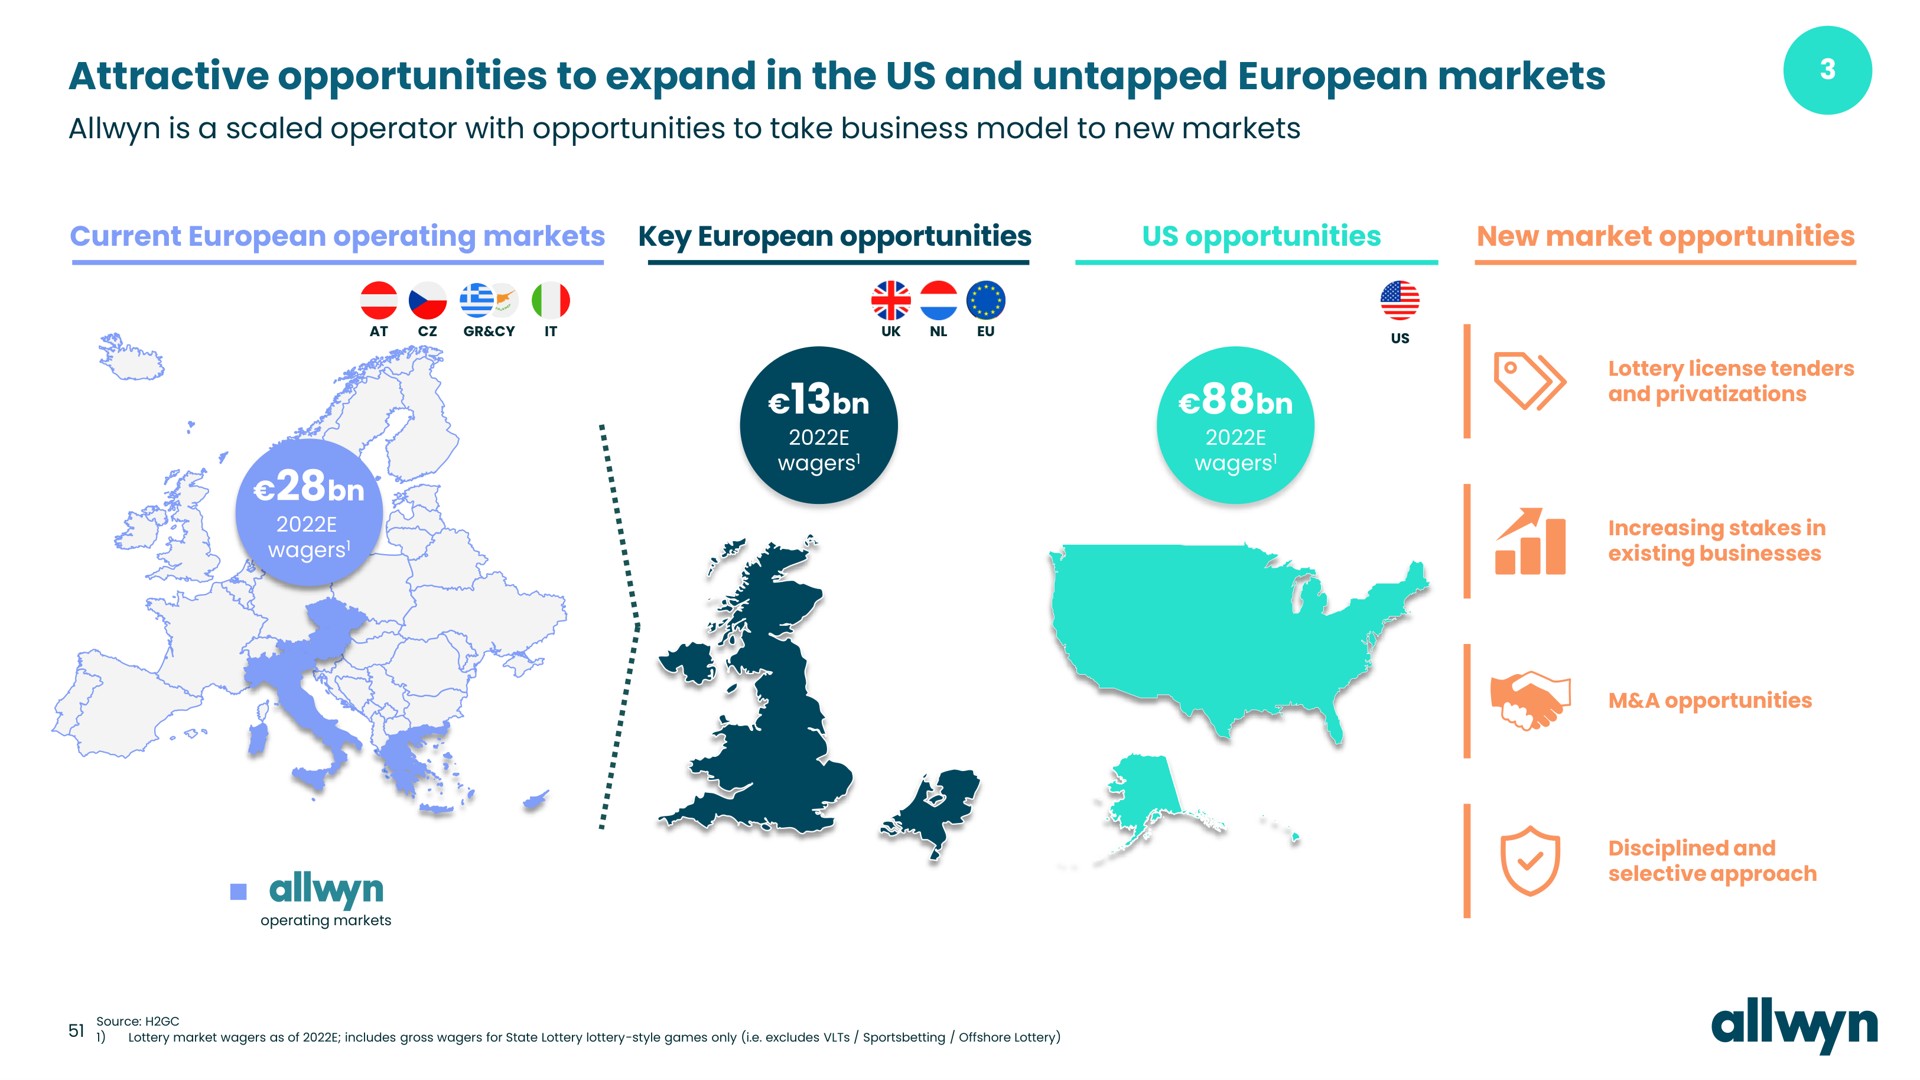 attractive opportunities to expand in the us and untapped markets err | Allwyn